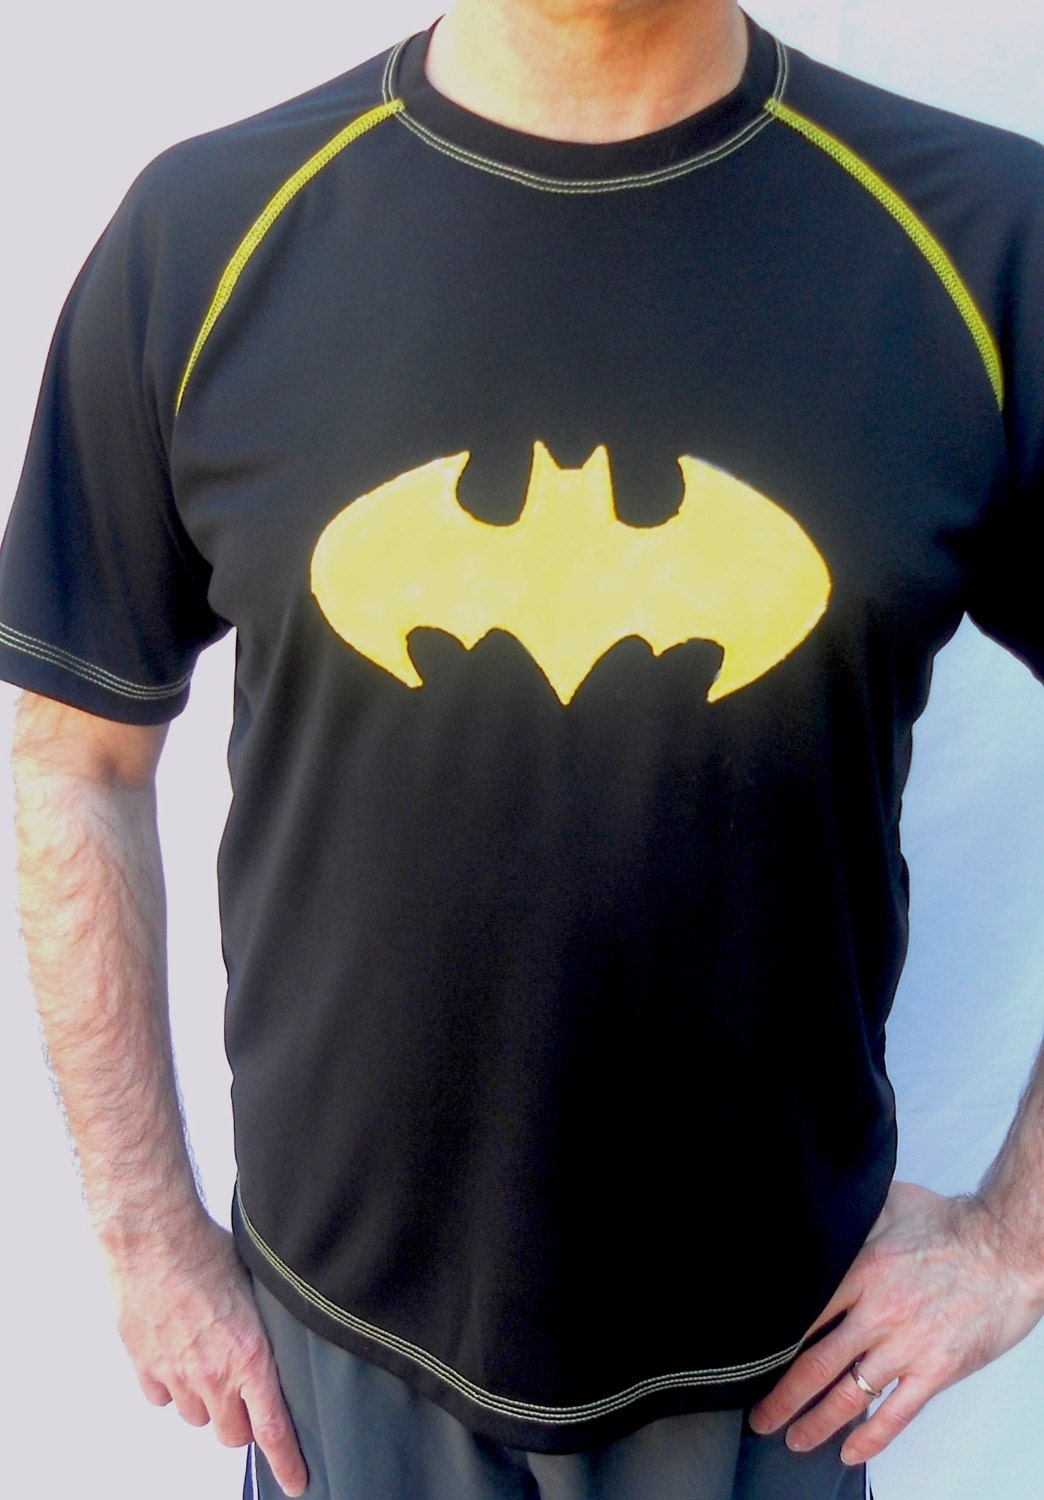 Batman inspired running top for him with wrist bands